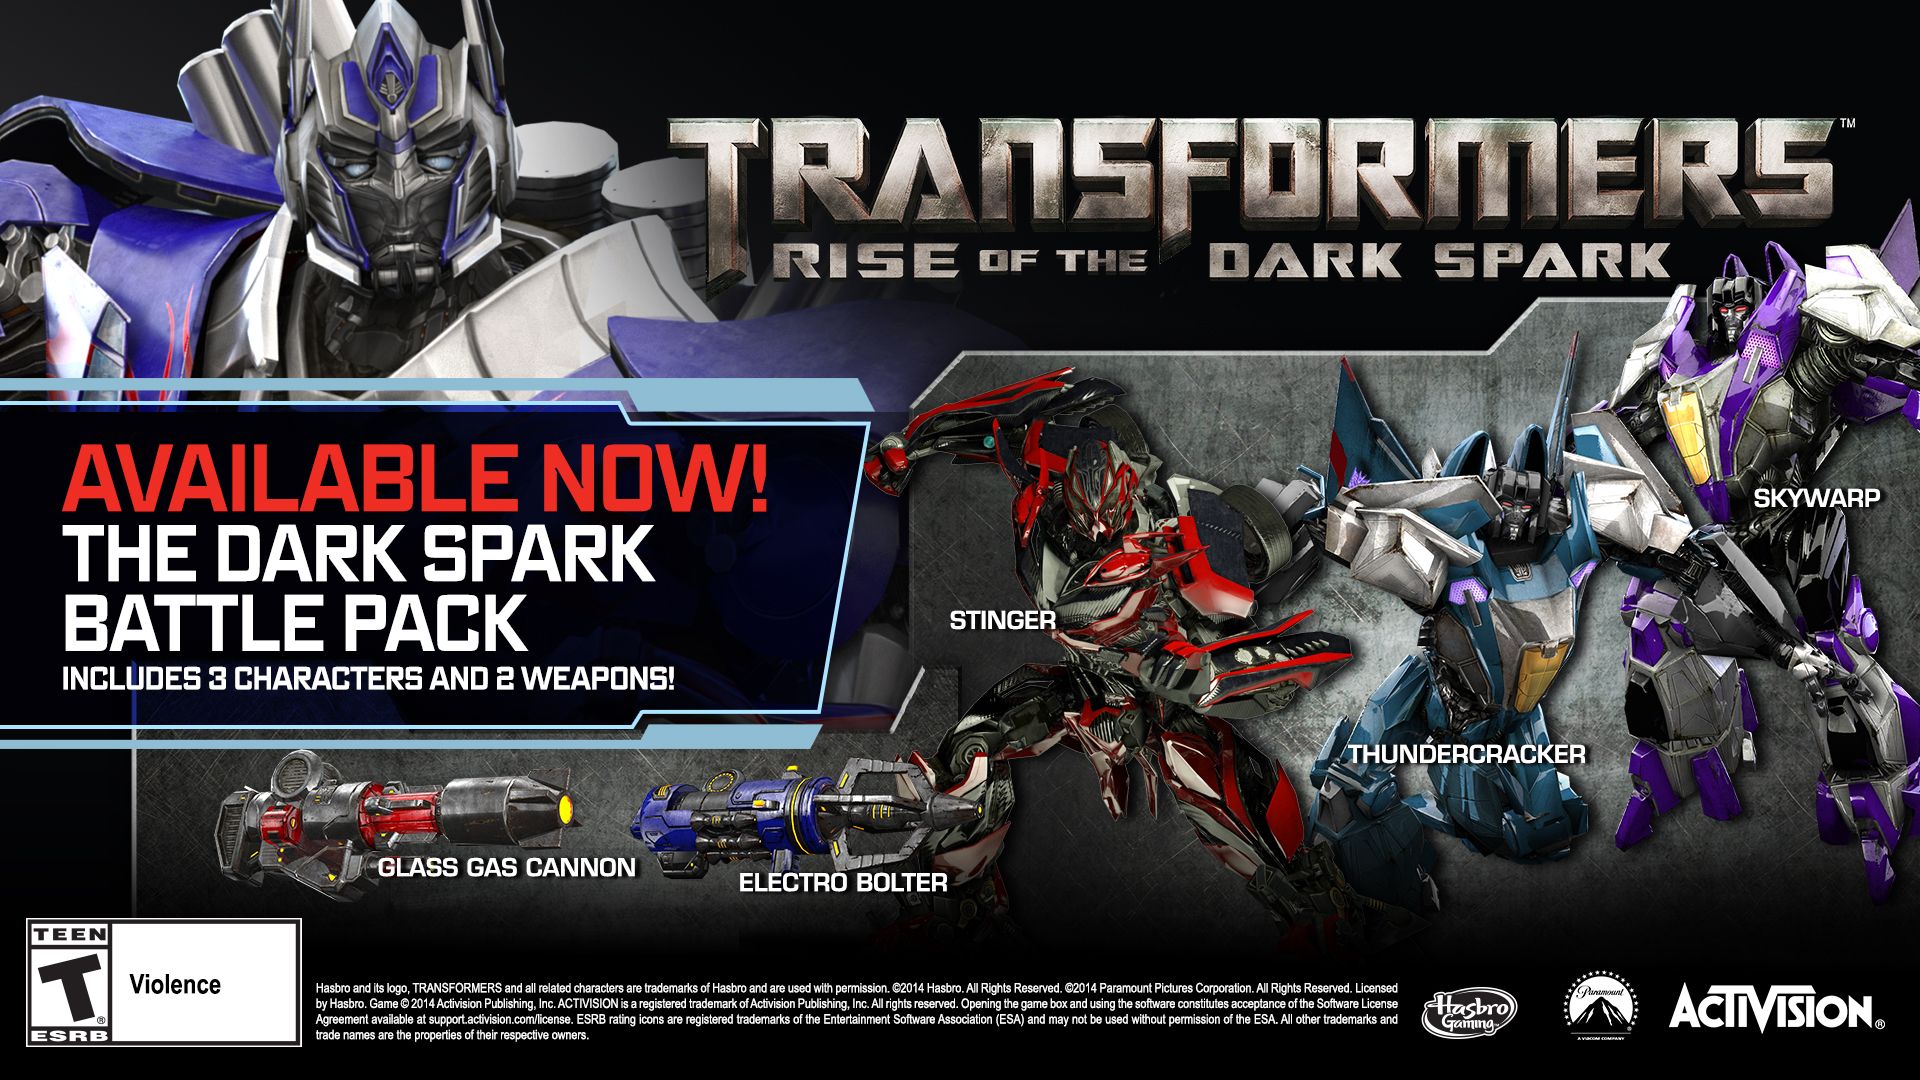 Activision launches new DLC pack for Transformers: Rise